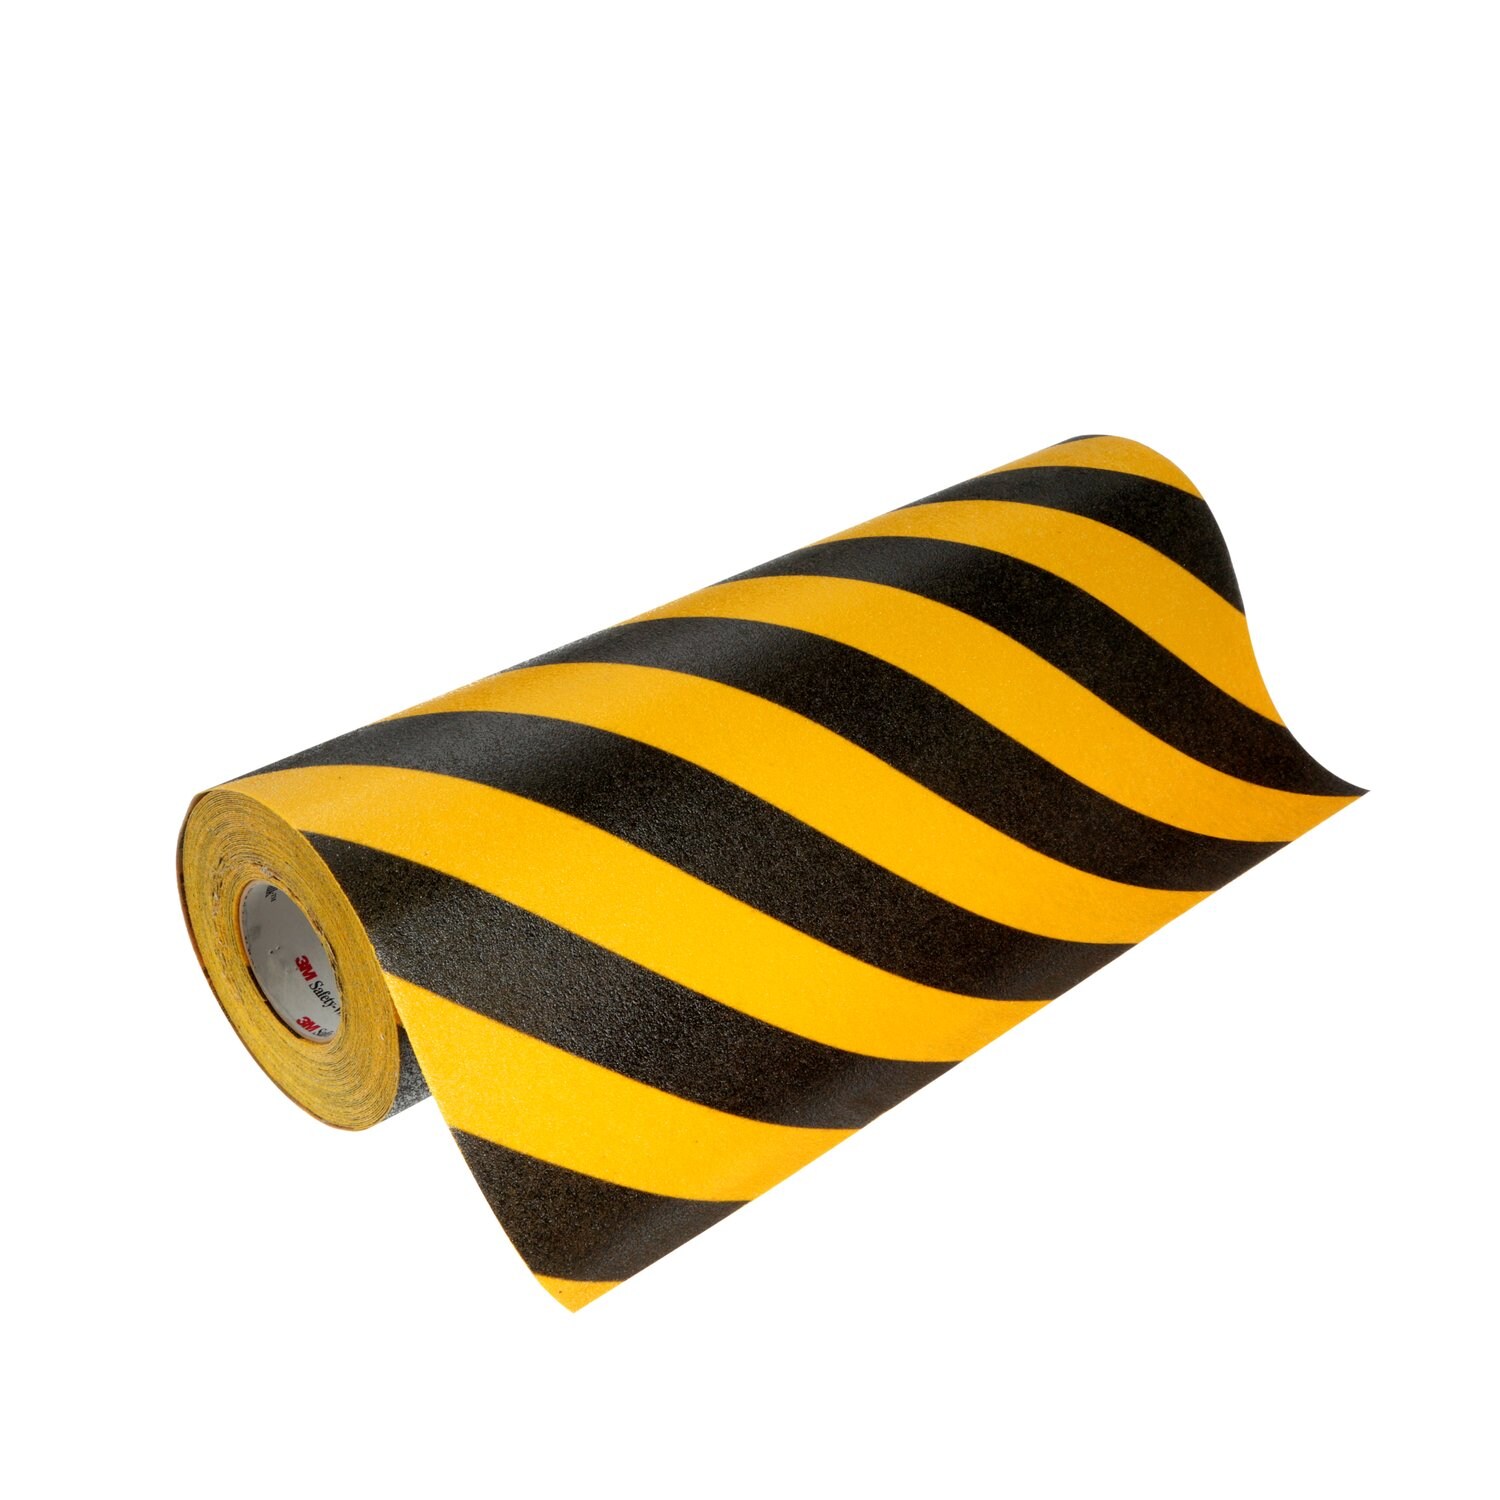 7100127377 - 3M Safety-Walk Slip-Resistant General Purpose Tapes & Treads 613,
Black/Yellow Stripe, 1 in, Configurable Roll